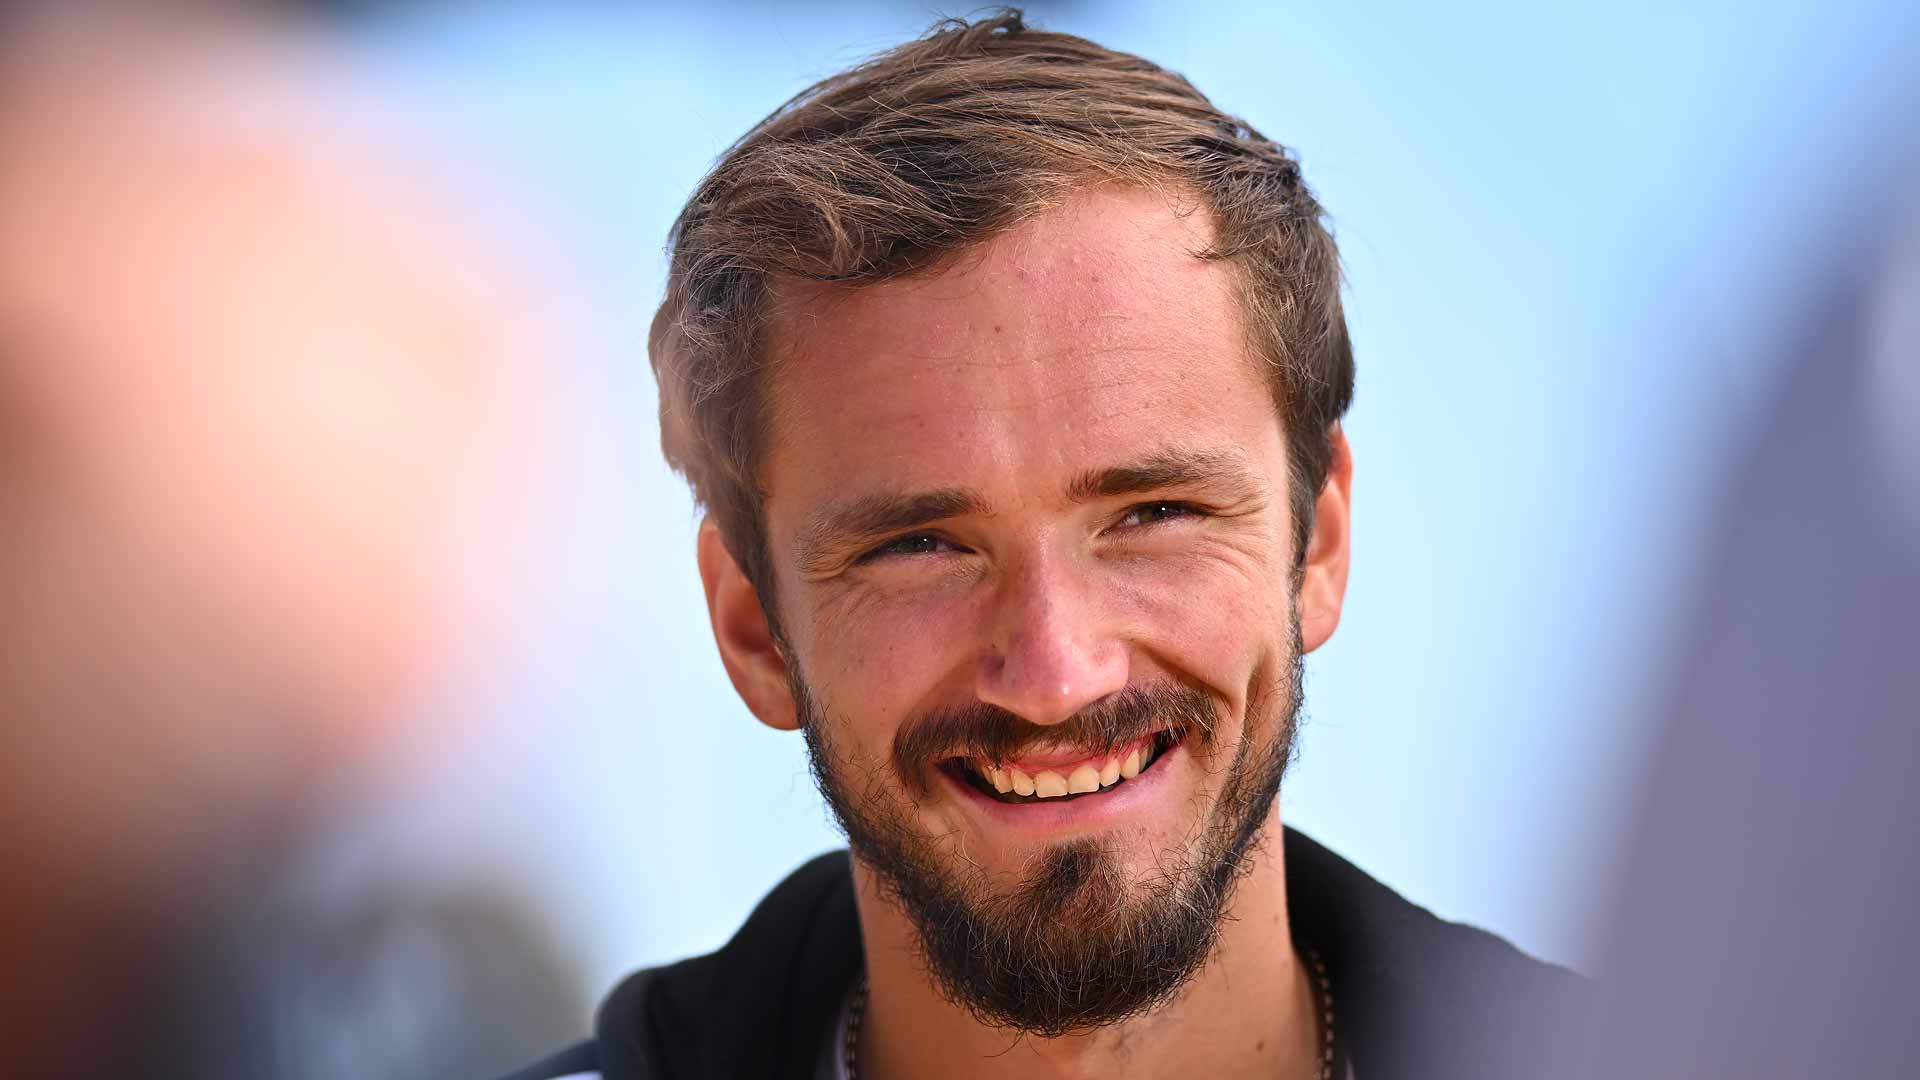 Daniil Medvedev is the third seed at the Rolex Monte-Carlo Masters.